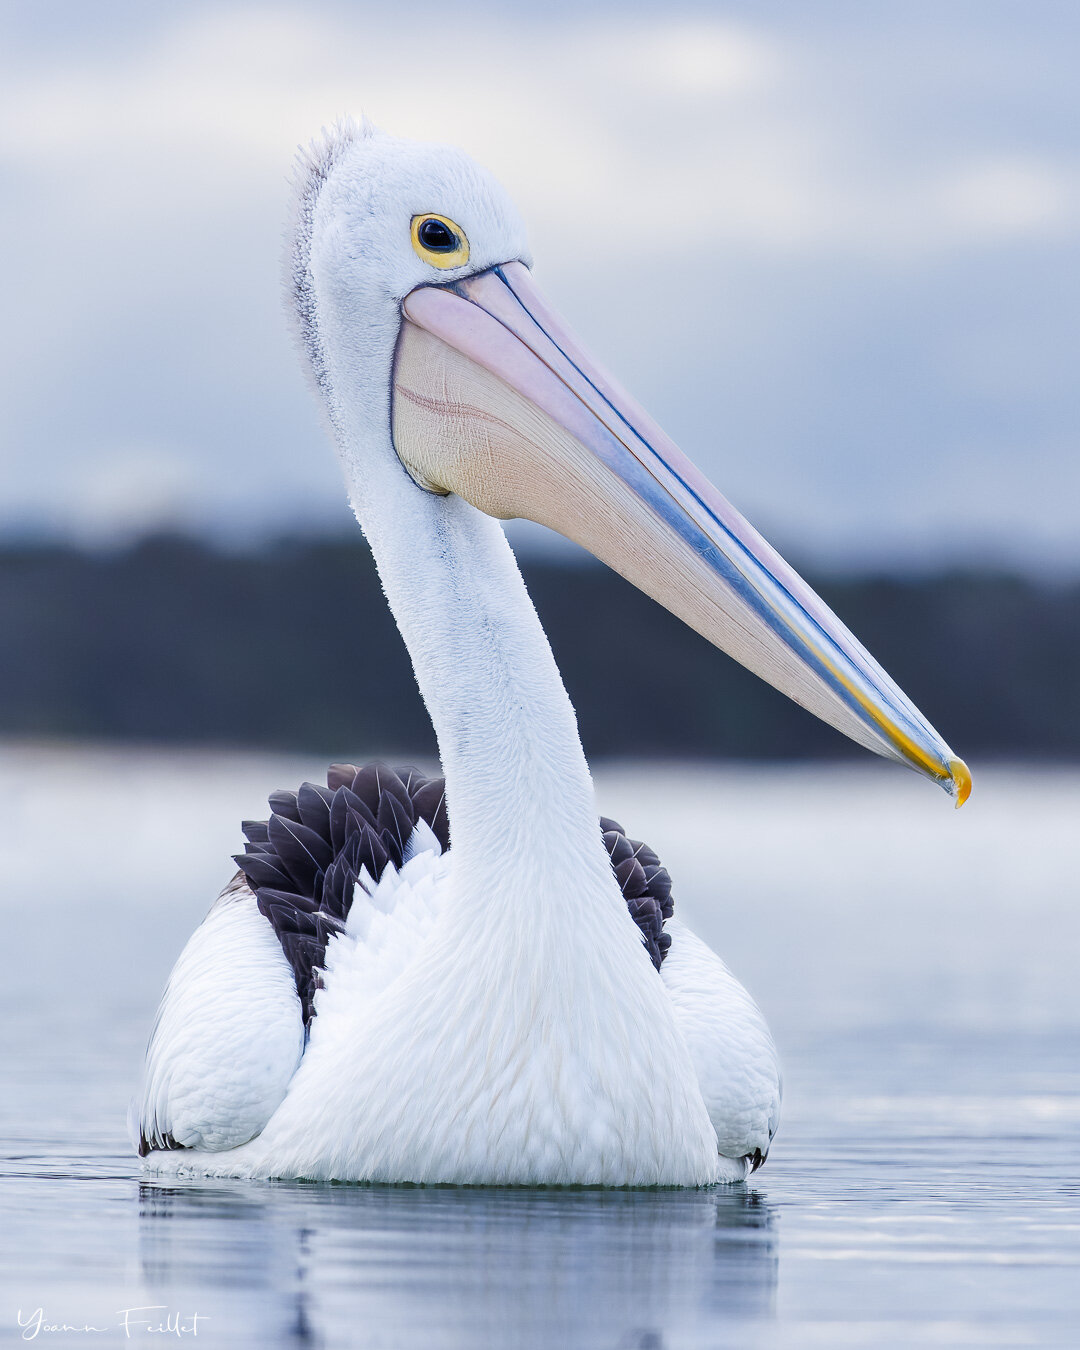 🇳🇿 I like the Australian Pelican, it&rsquo;s such a funny bird to watch. Not because it&rsquo;s Australian, because it&rsquo;s a pelican. A giant duck-like bird sitting on the water, a bit opportunistic, a bit clumsy, a bit weird with its long bill